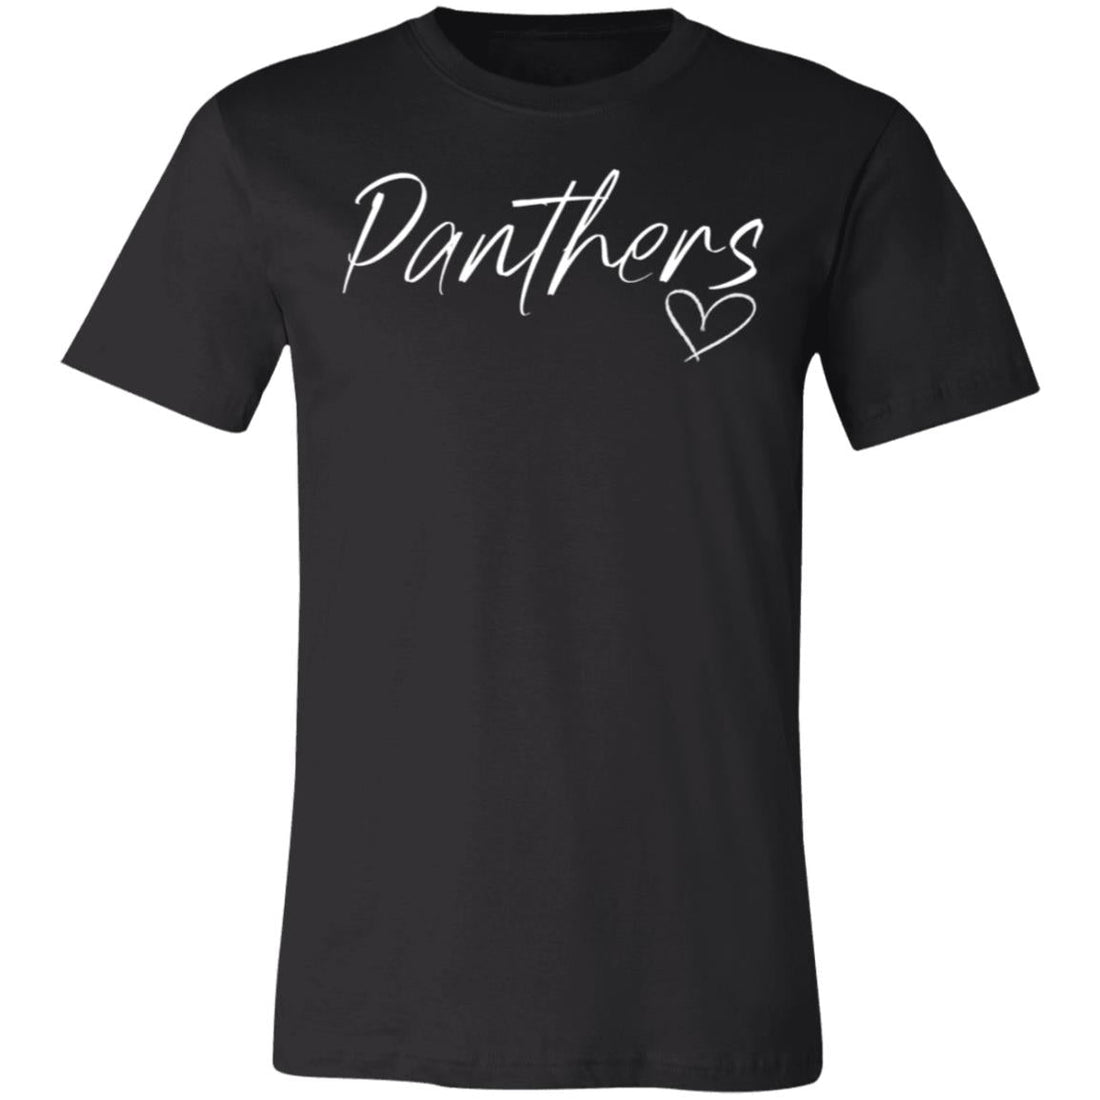 Panthers Heart T-Shirt - T-Shirts - Positively Sassy - Panthers Heart T-Shirt